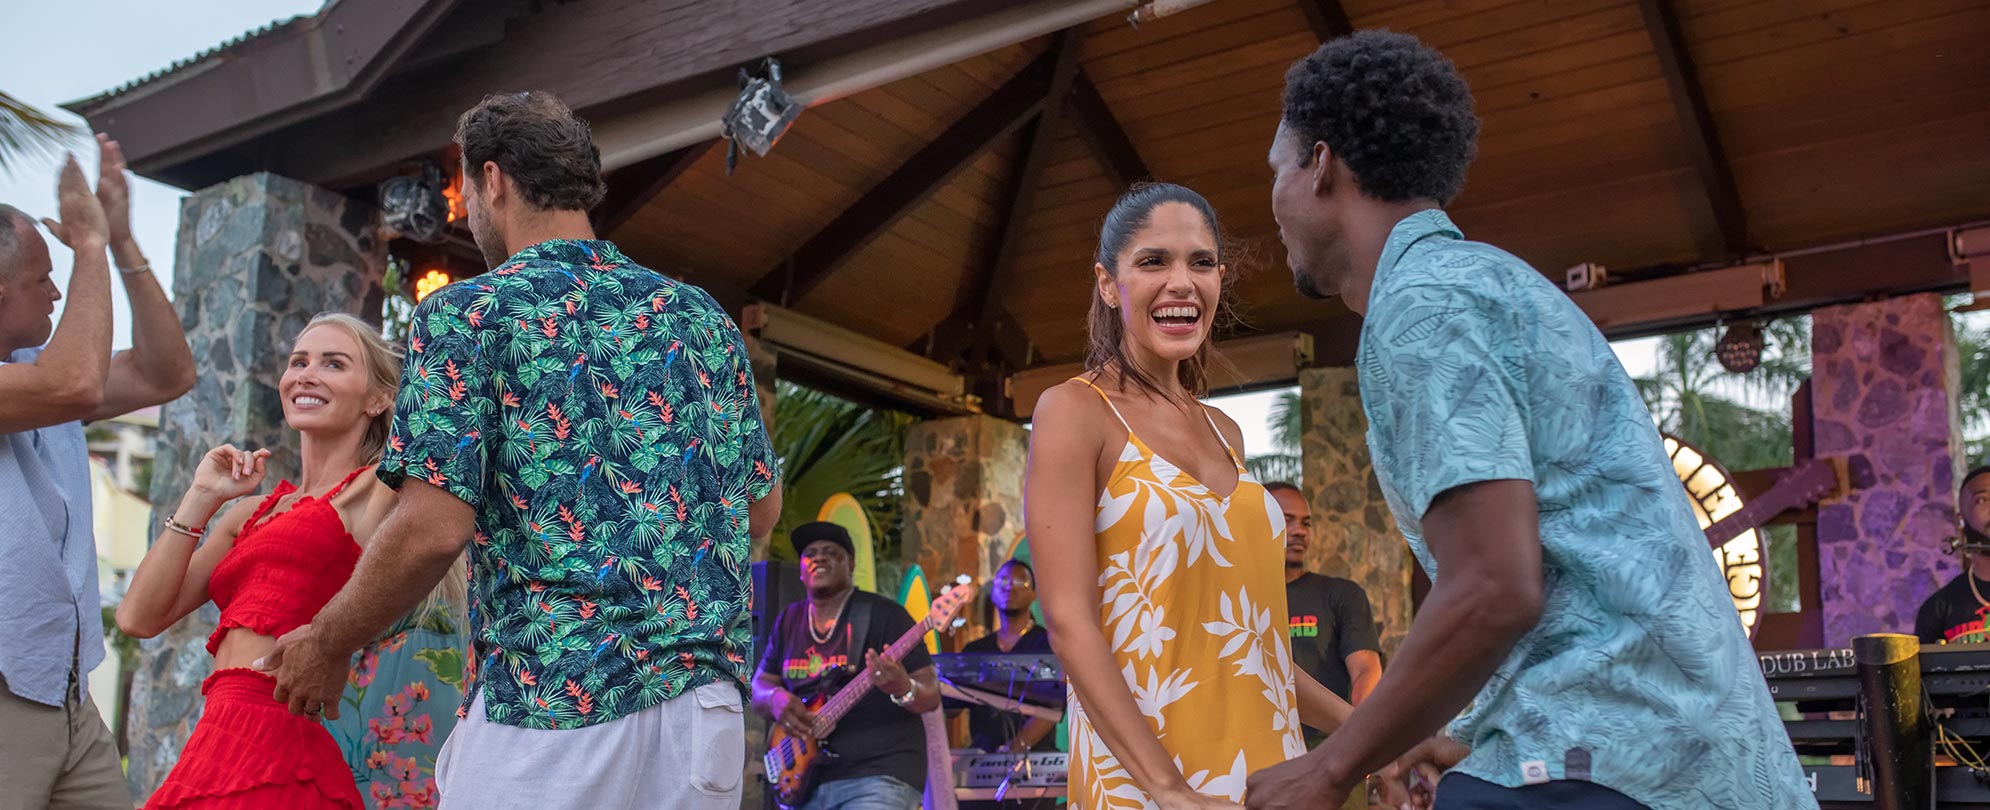 Men and women enjoy a warm winter vacation, dancing in front of a live band at a Margaritaville Vacation Club resort.